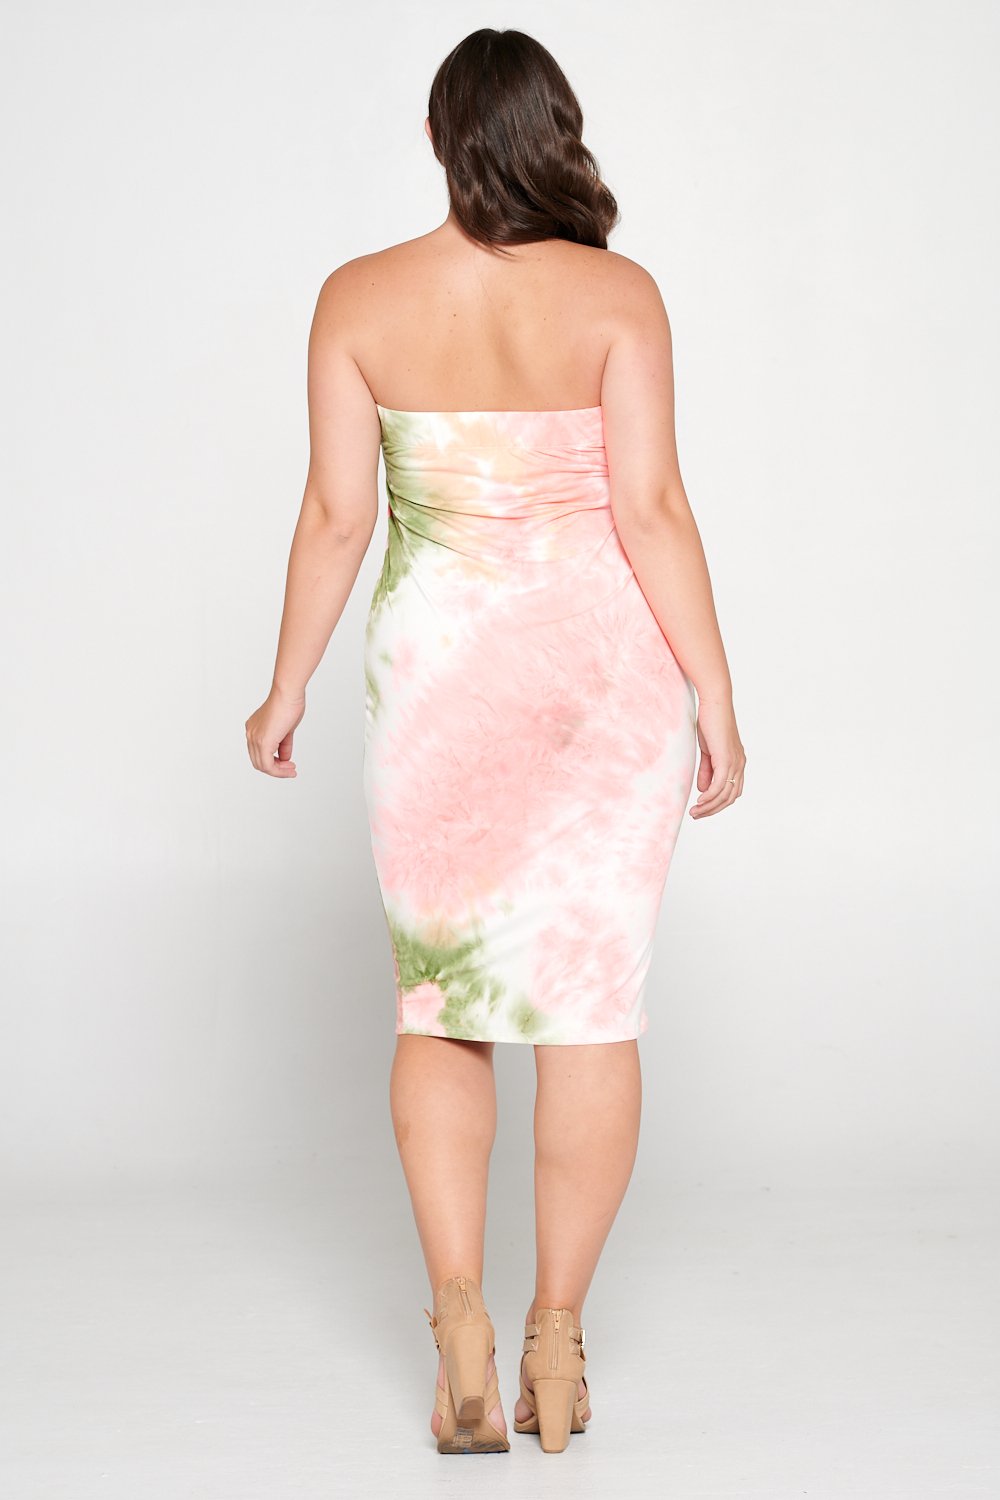 livd L I V D women's contemporary plus size clothing tube dress in olive pink blush tie dye